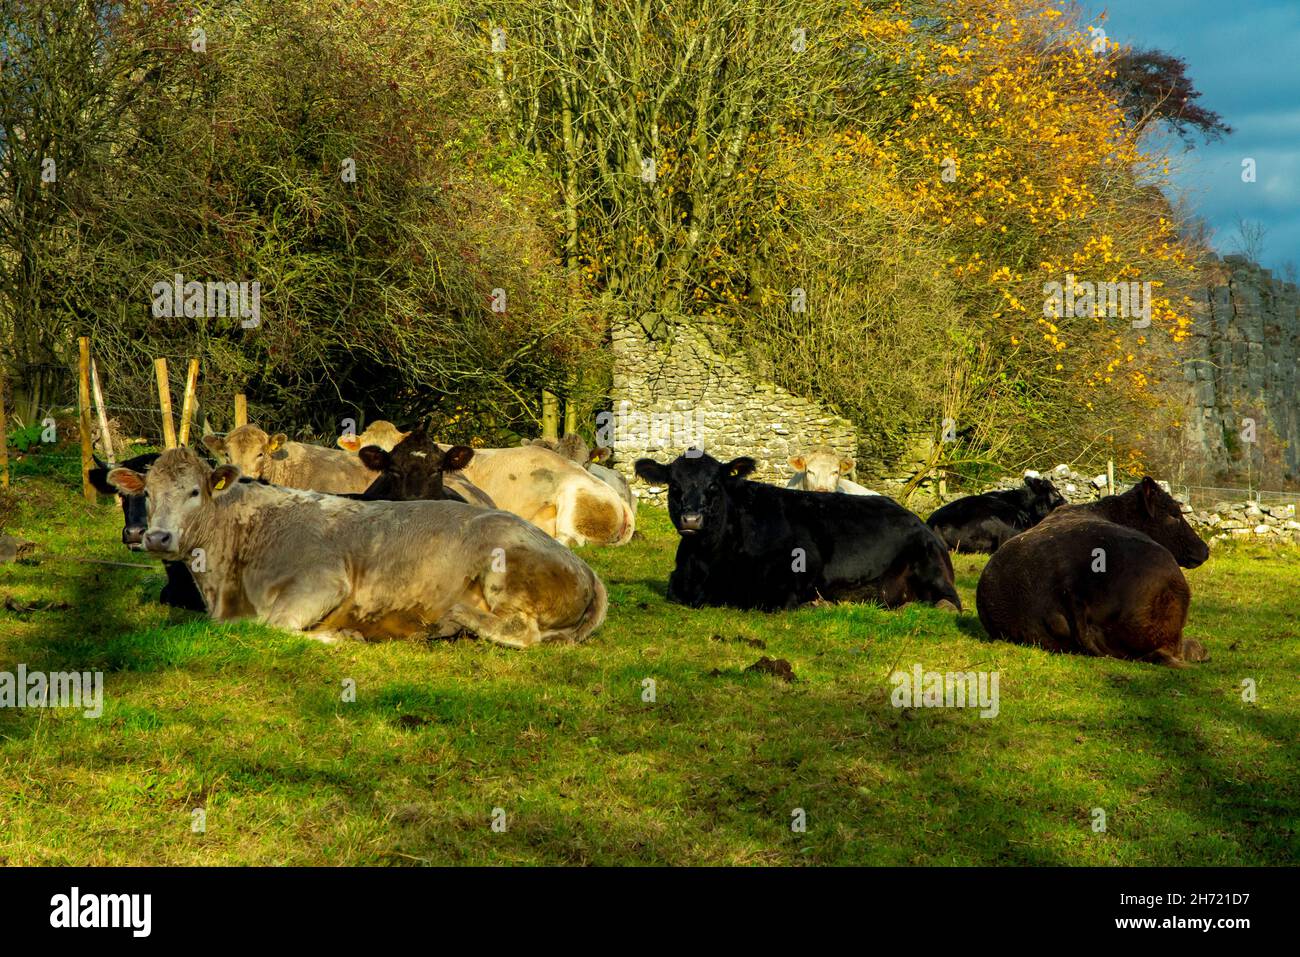 Cattle grazing in a field with trees and a stormy sky behind. Stock Photo